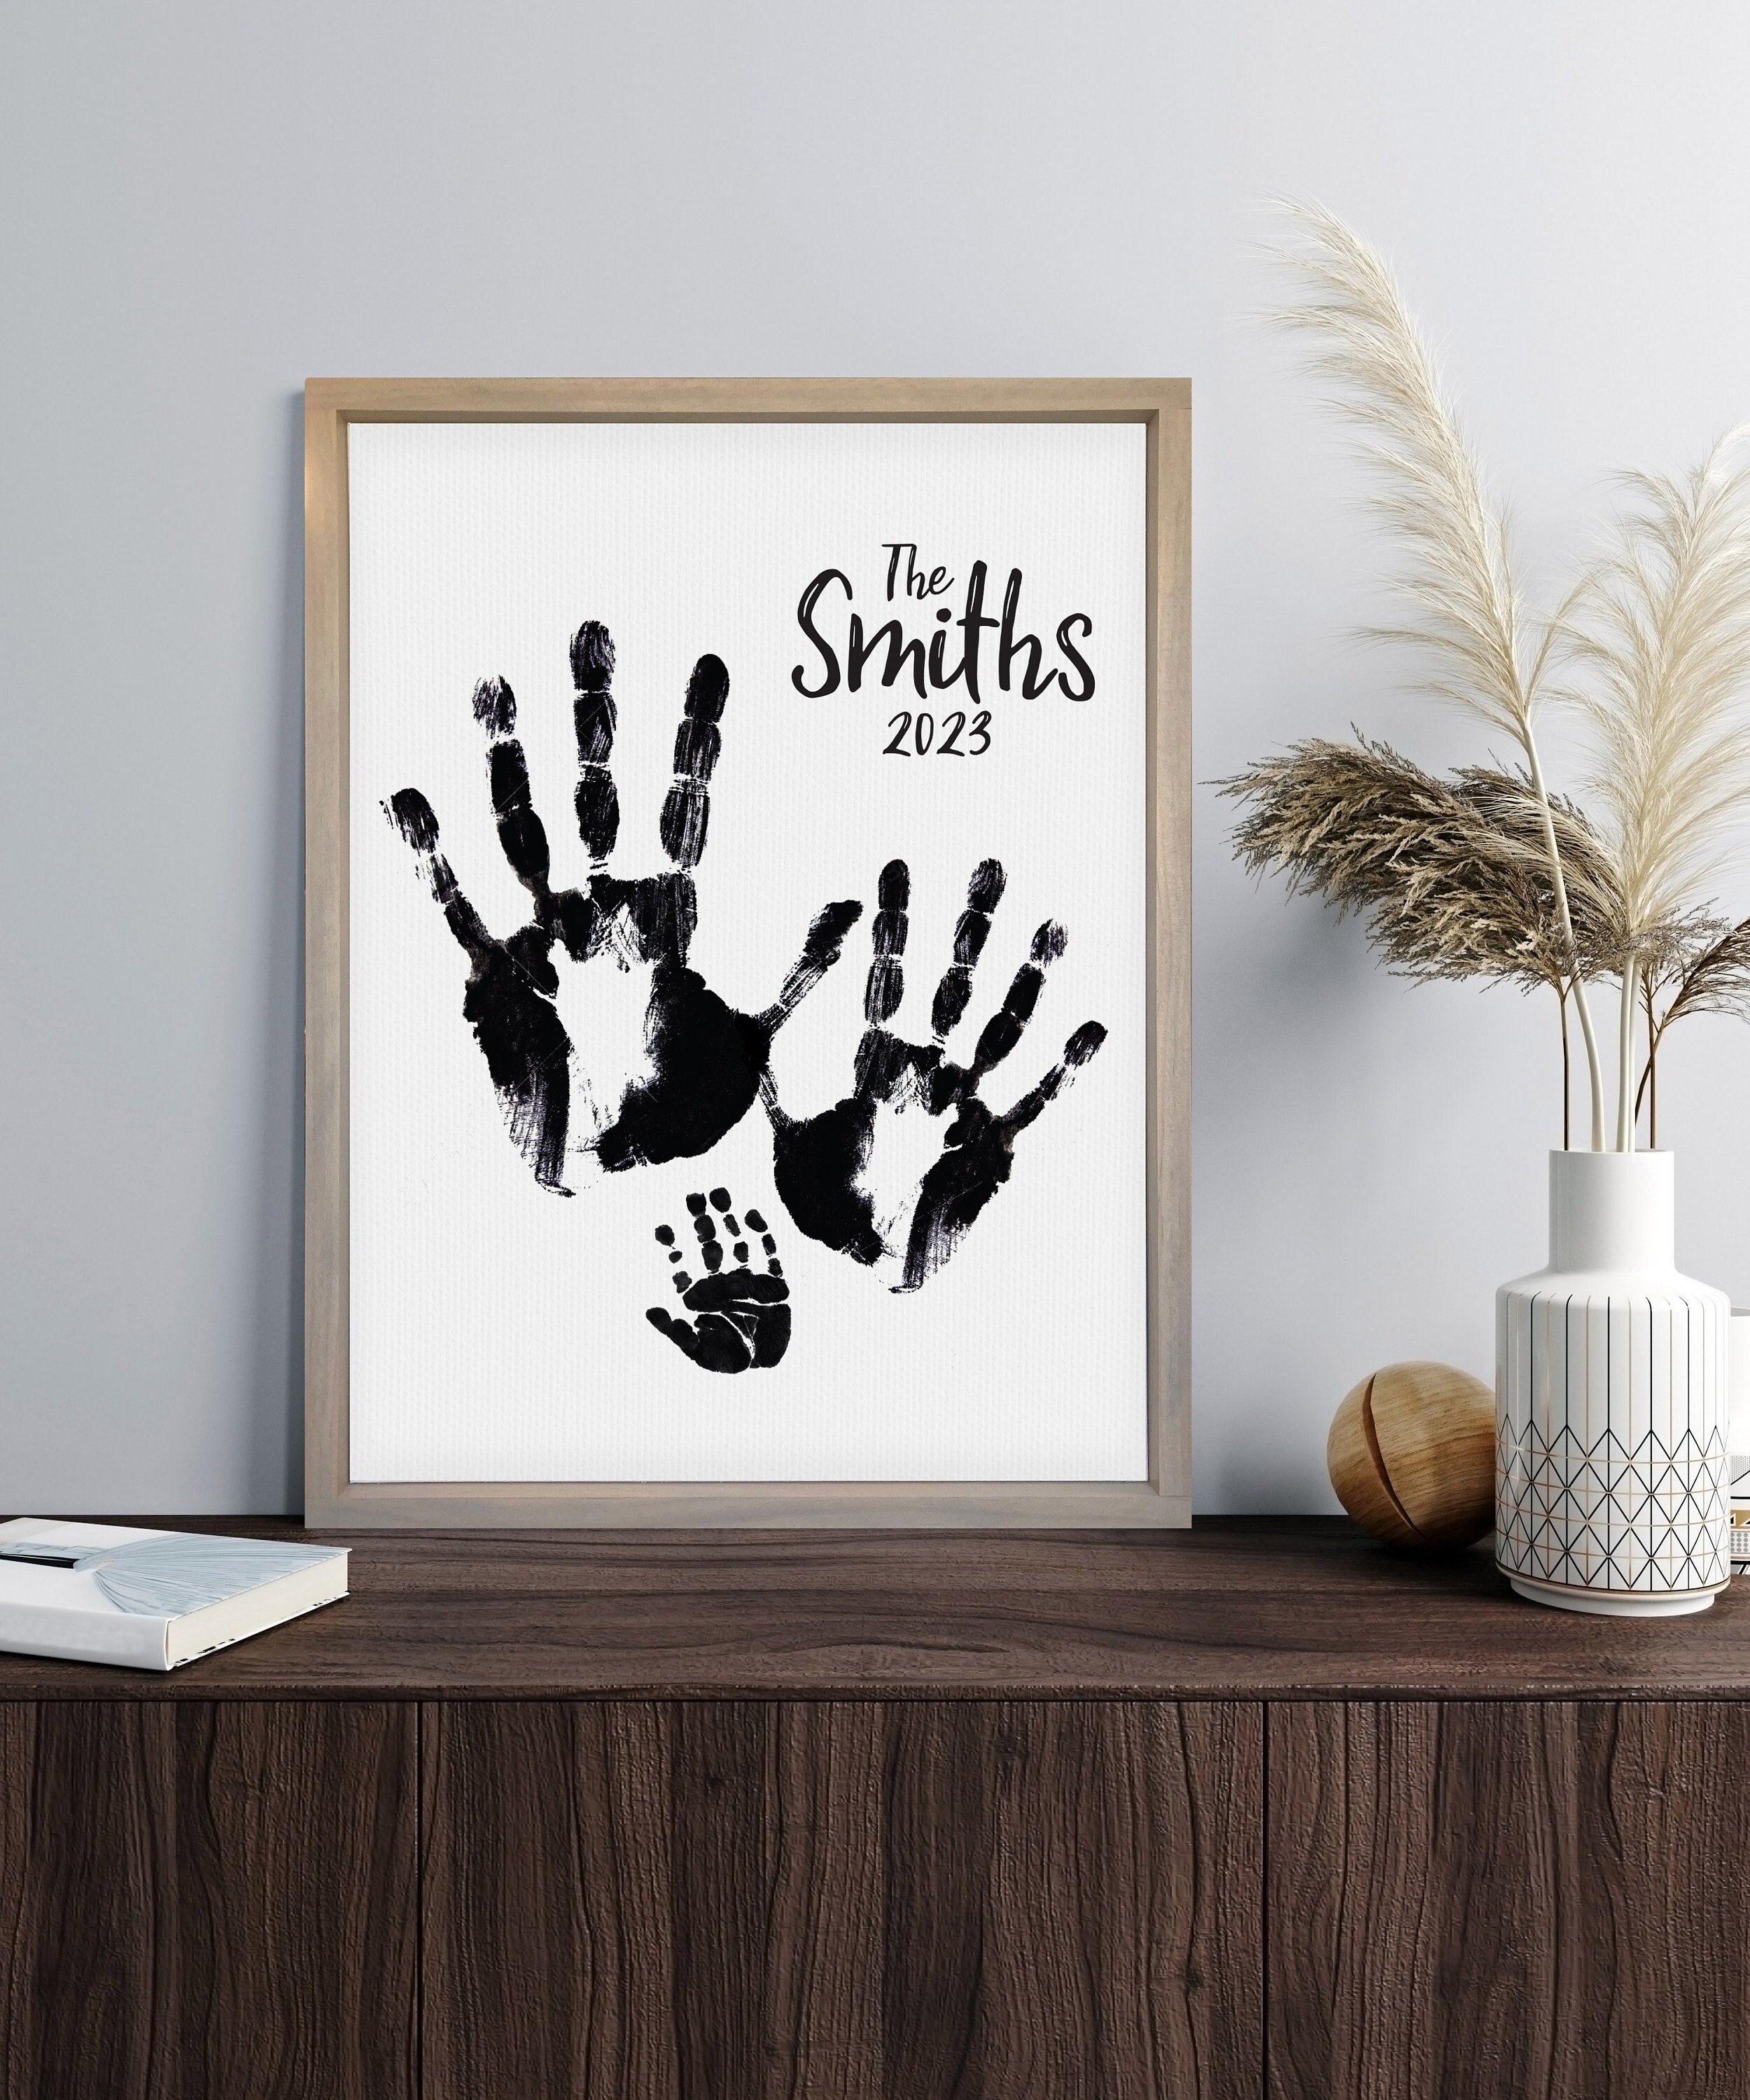 Customizable Baby Handprint Footprint Keepsake With Large Size Family Photo  Frame Kit Personalize W/your Family Name clean Touch Ink Pad 